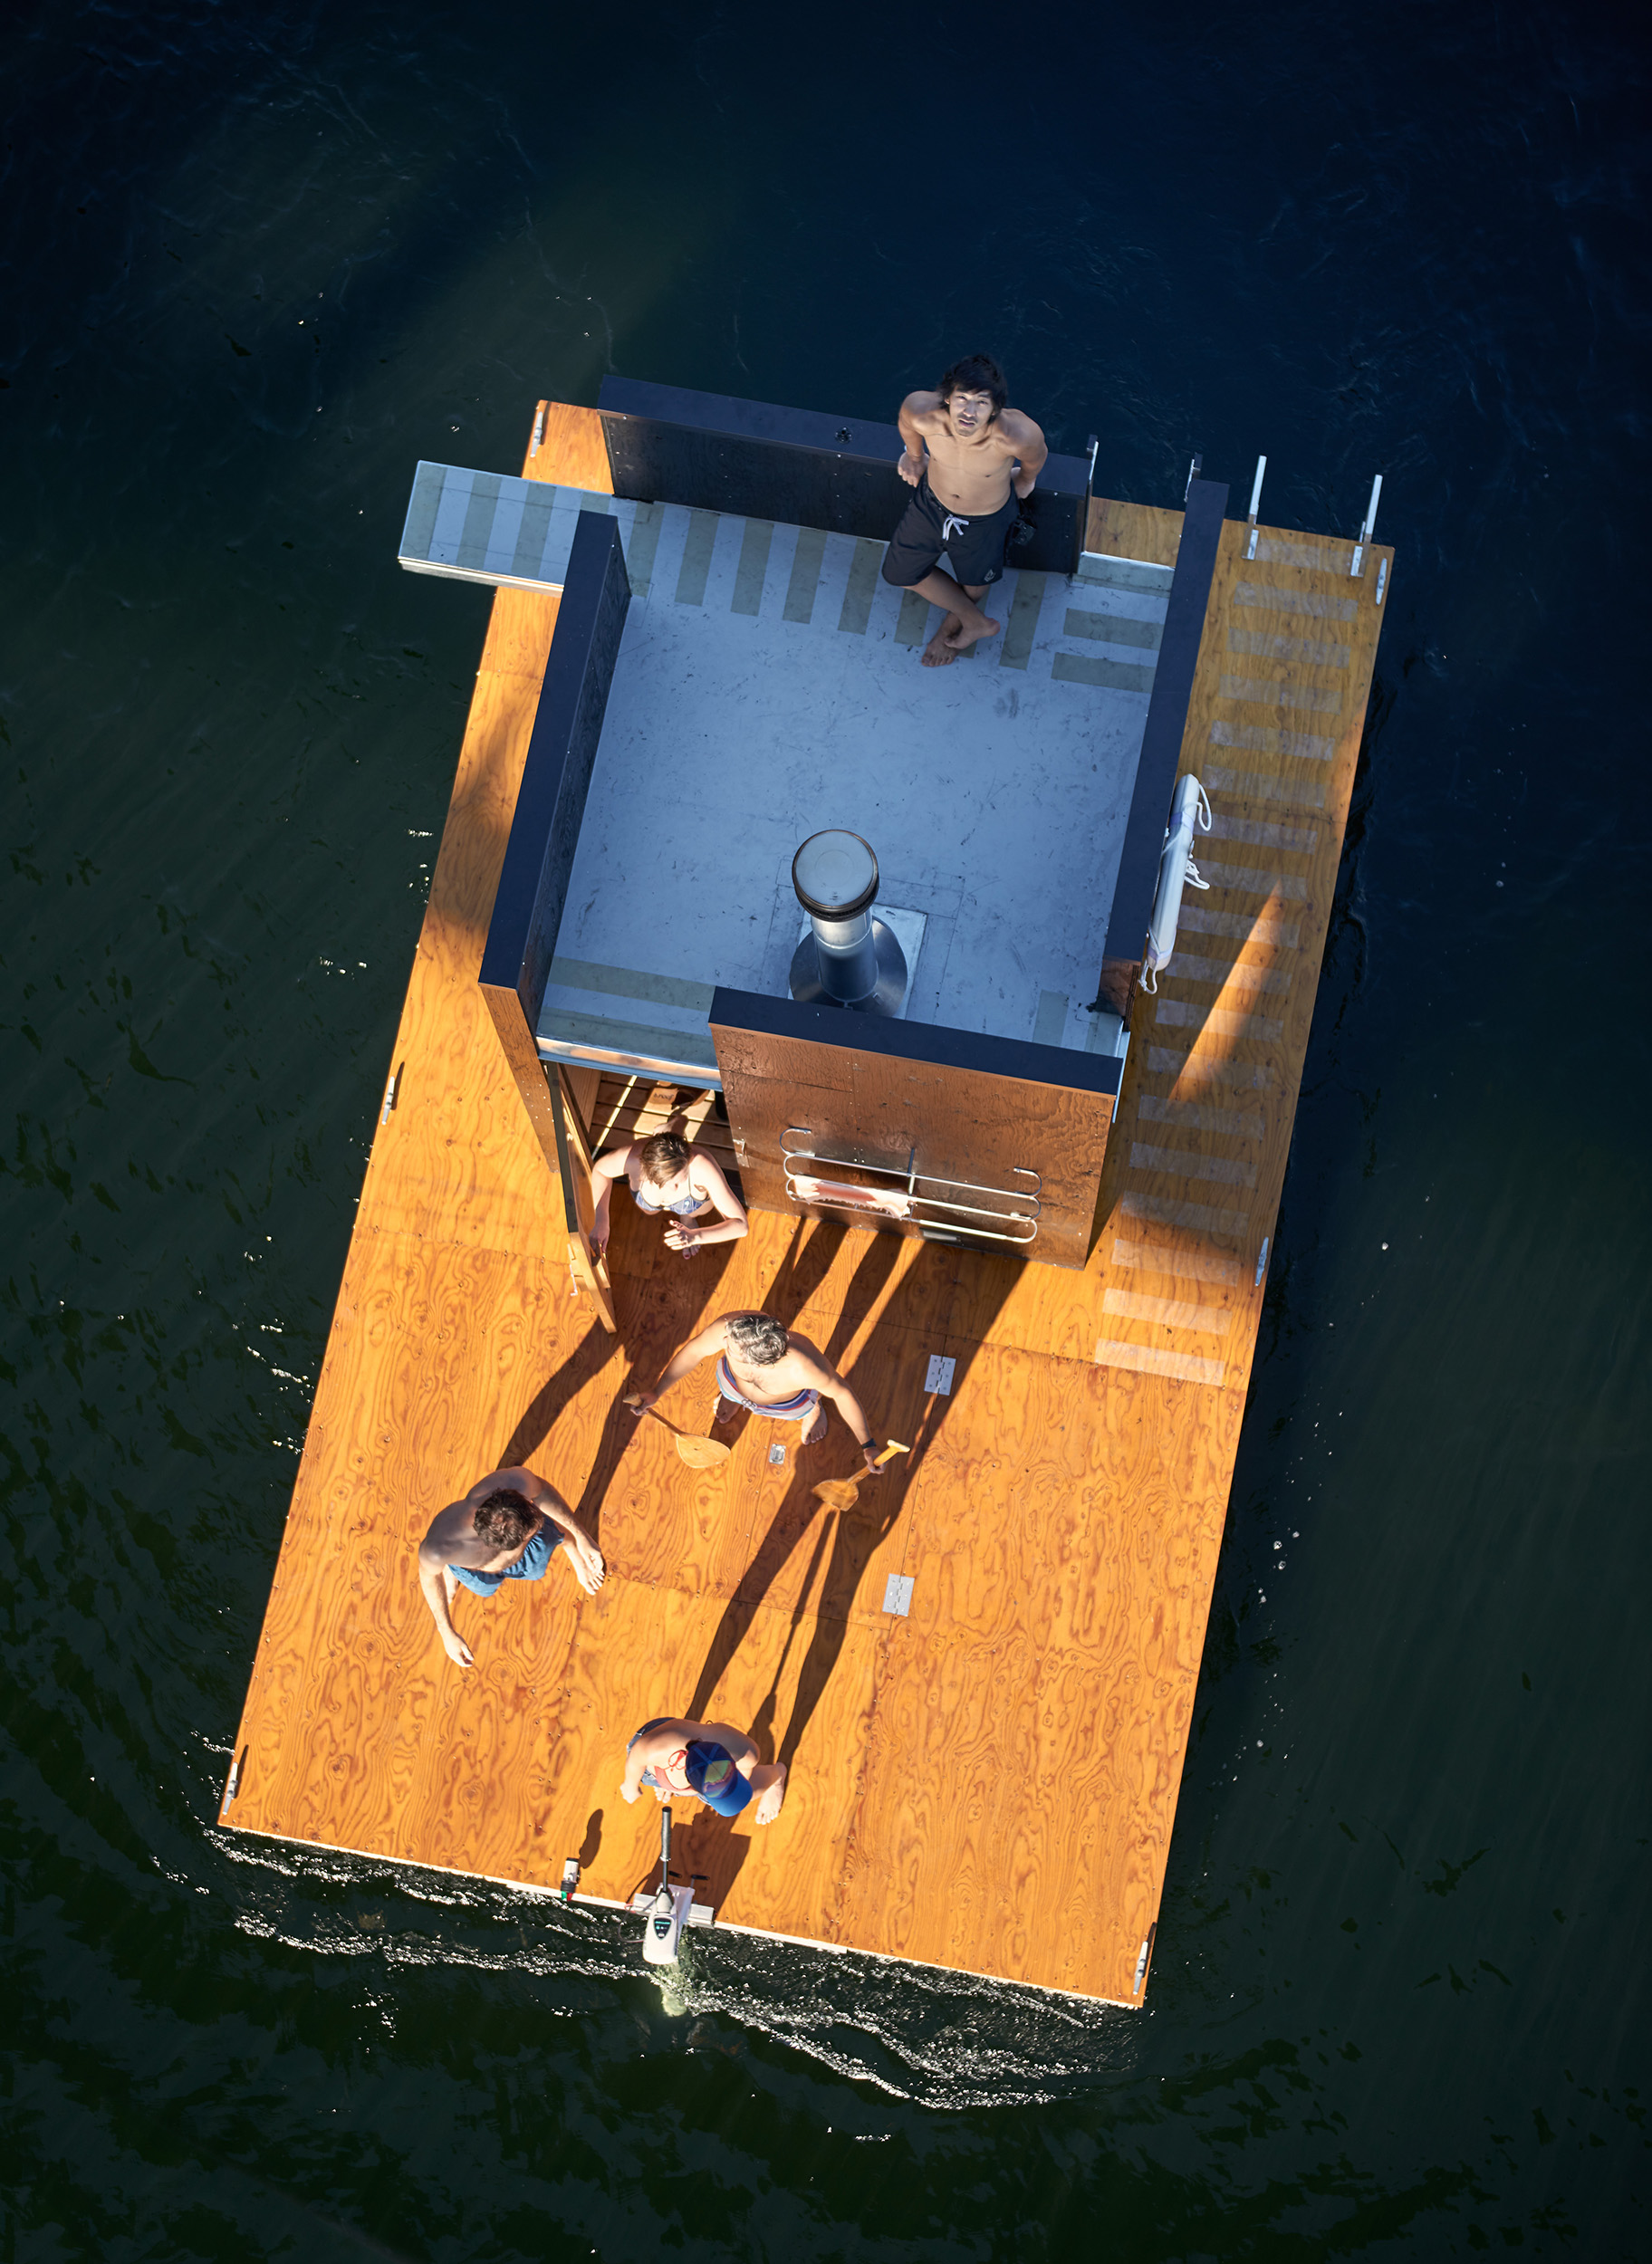 FLOATING SAUNA FROM ABOVE